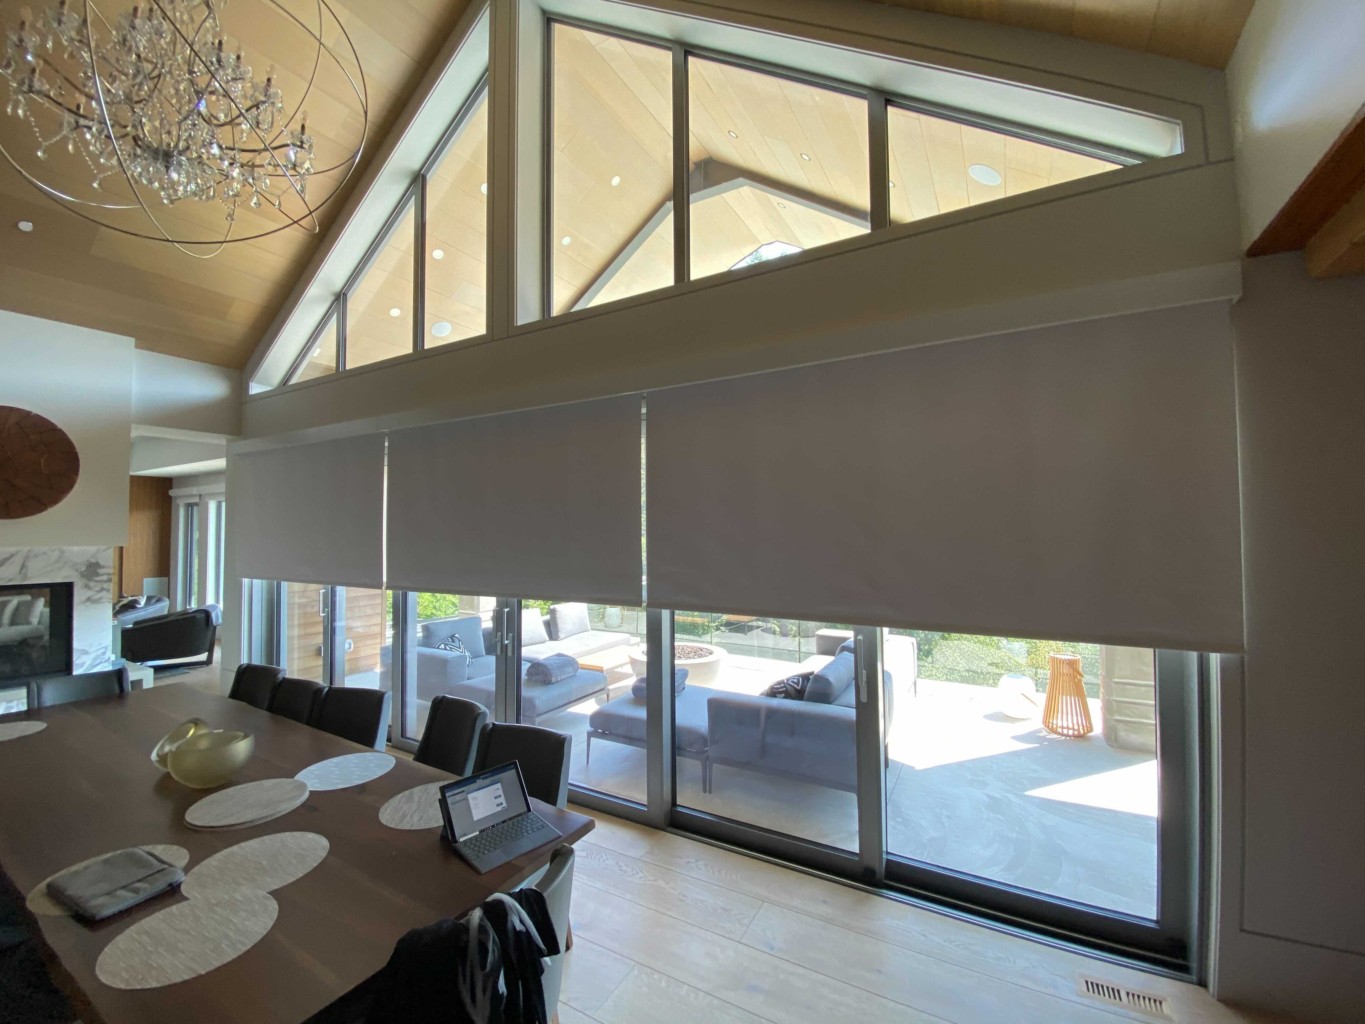 Lutron automated blinds installed in this Vancouver smart home.